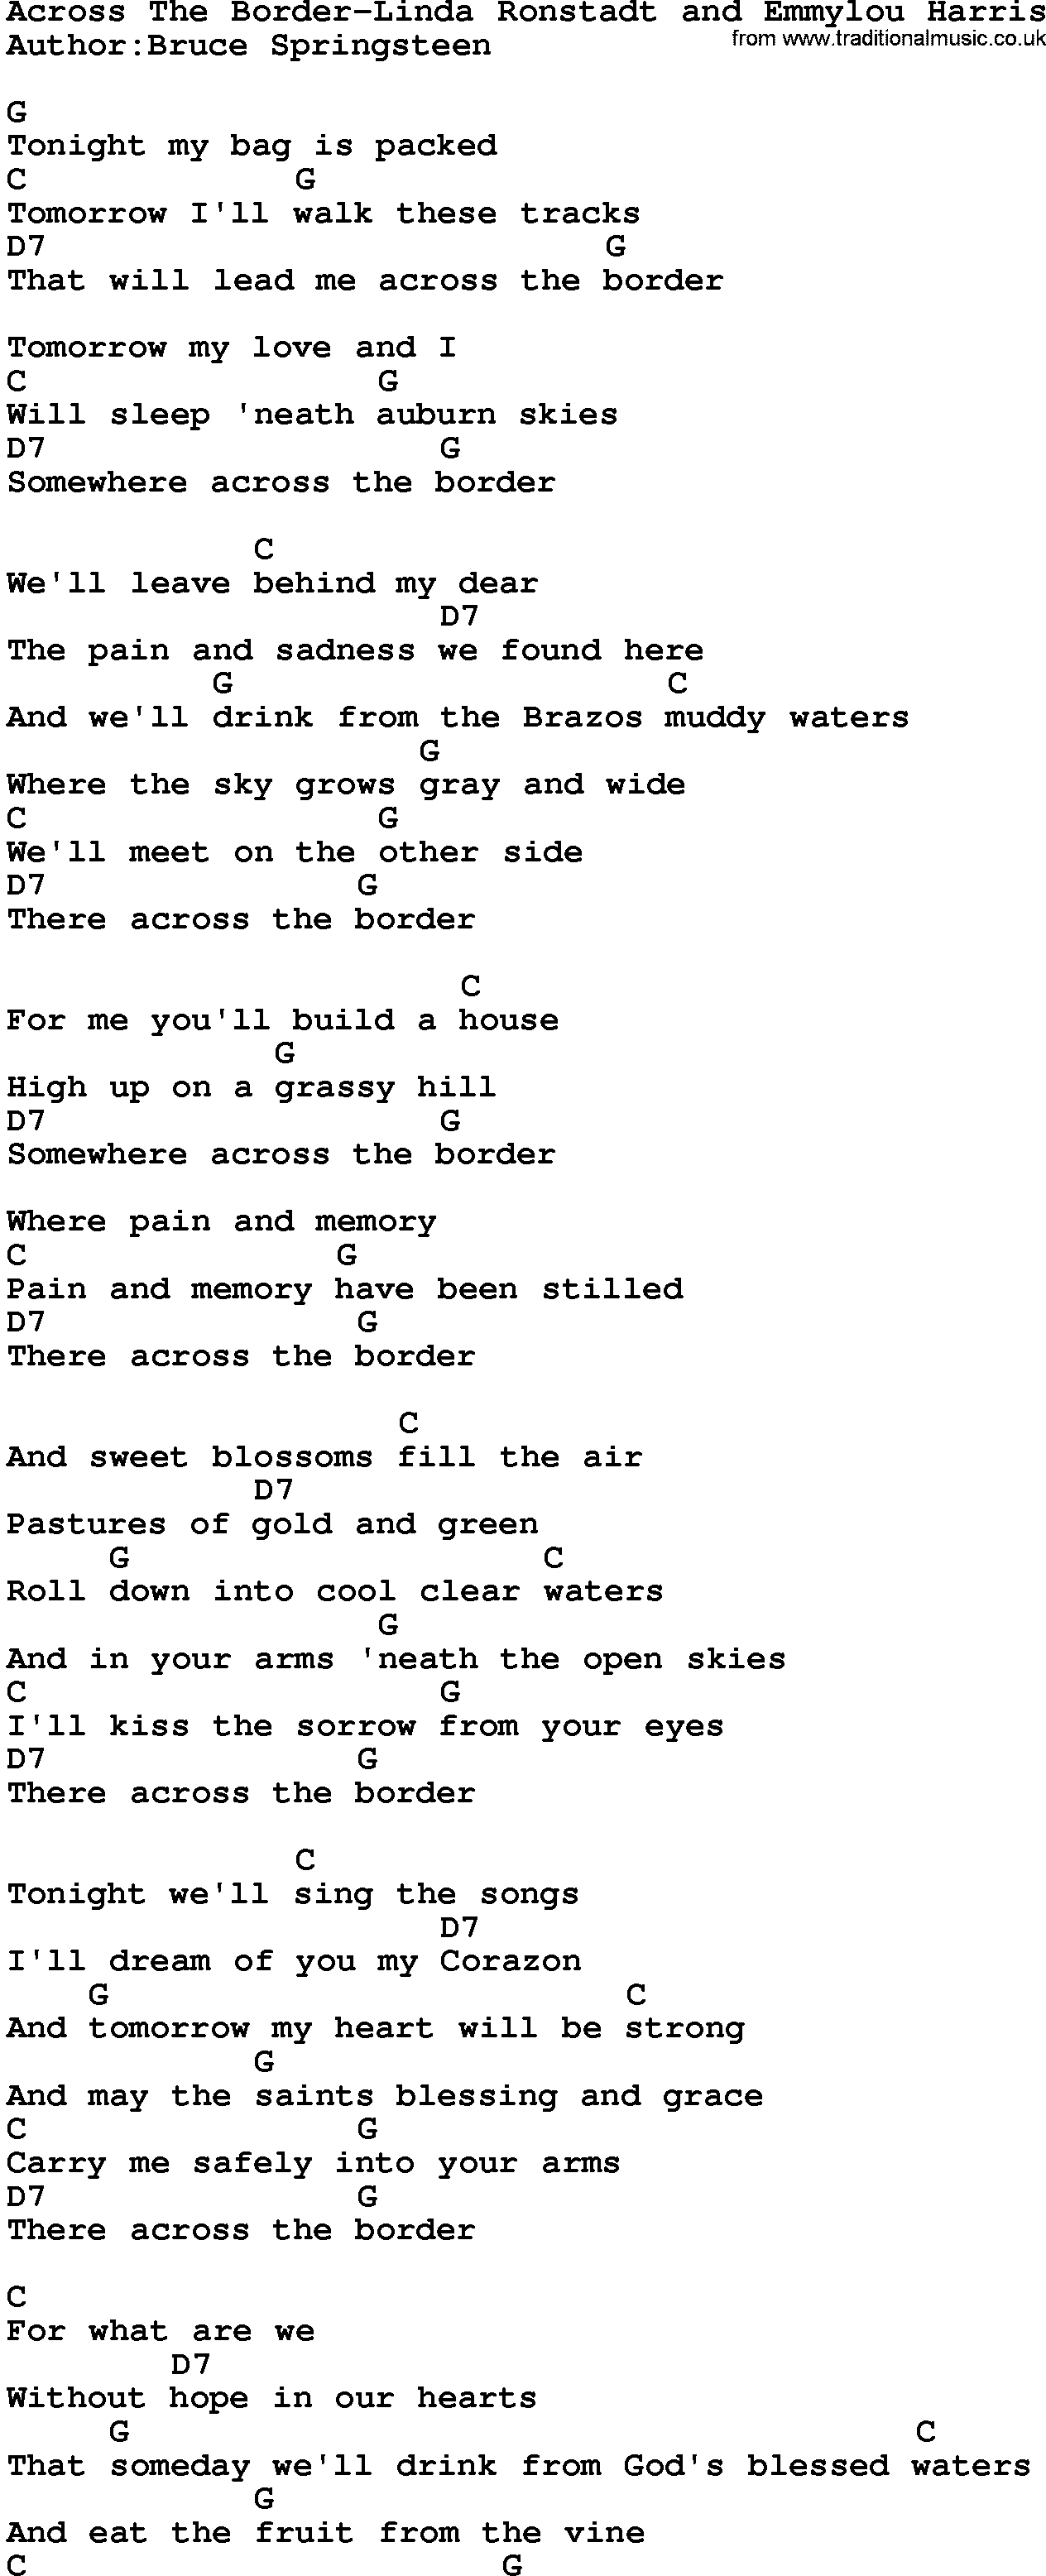 Country music song: Across The Border-Linda Ronstadt And Emmylou Harris lyrics and chords